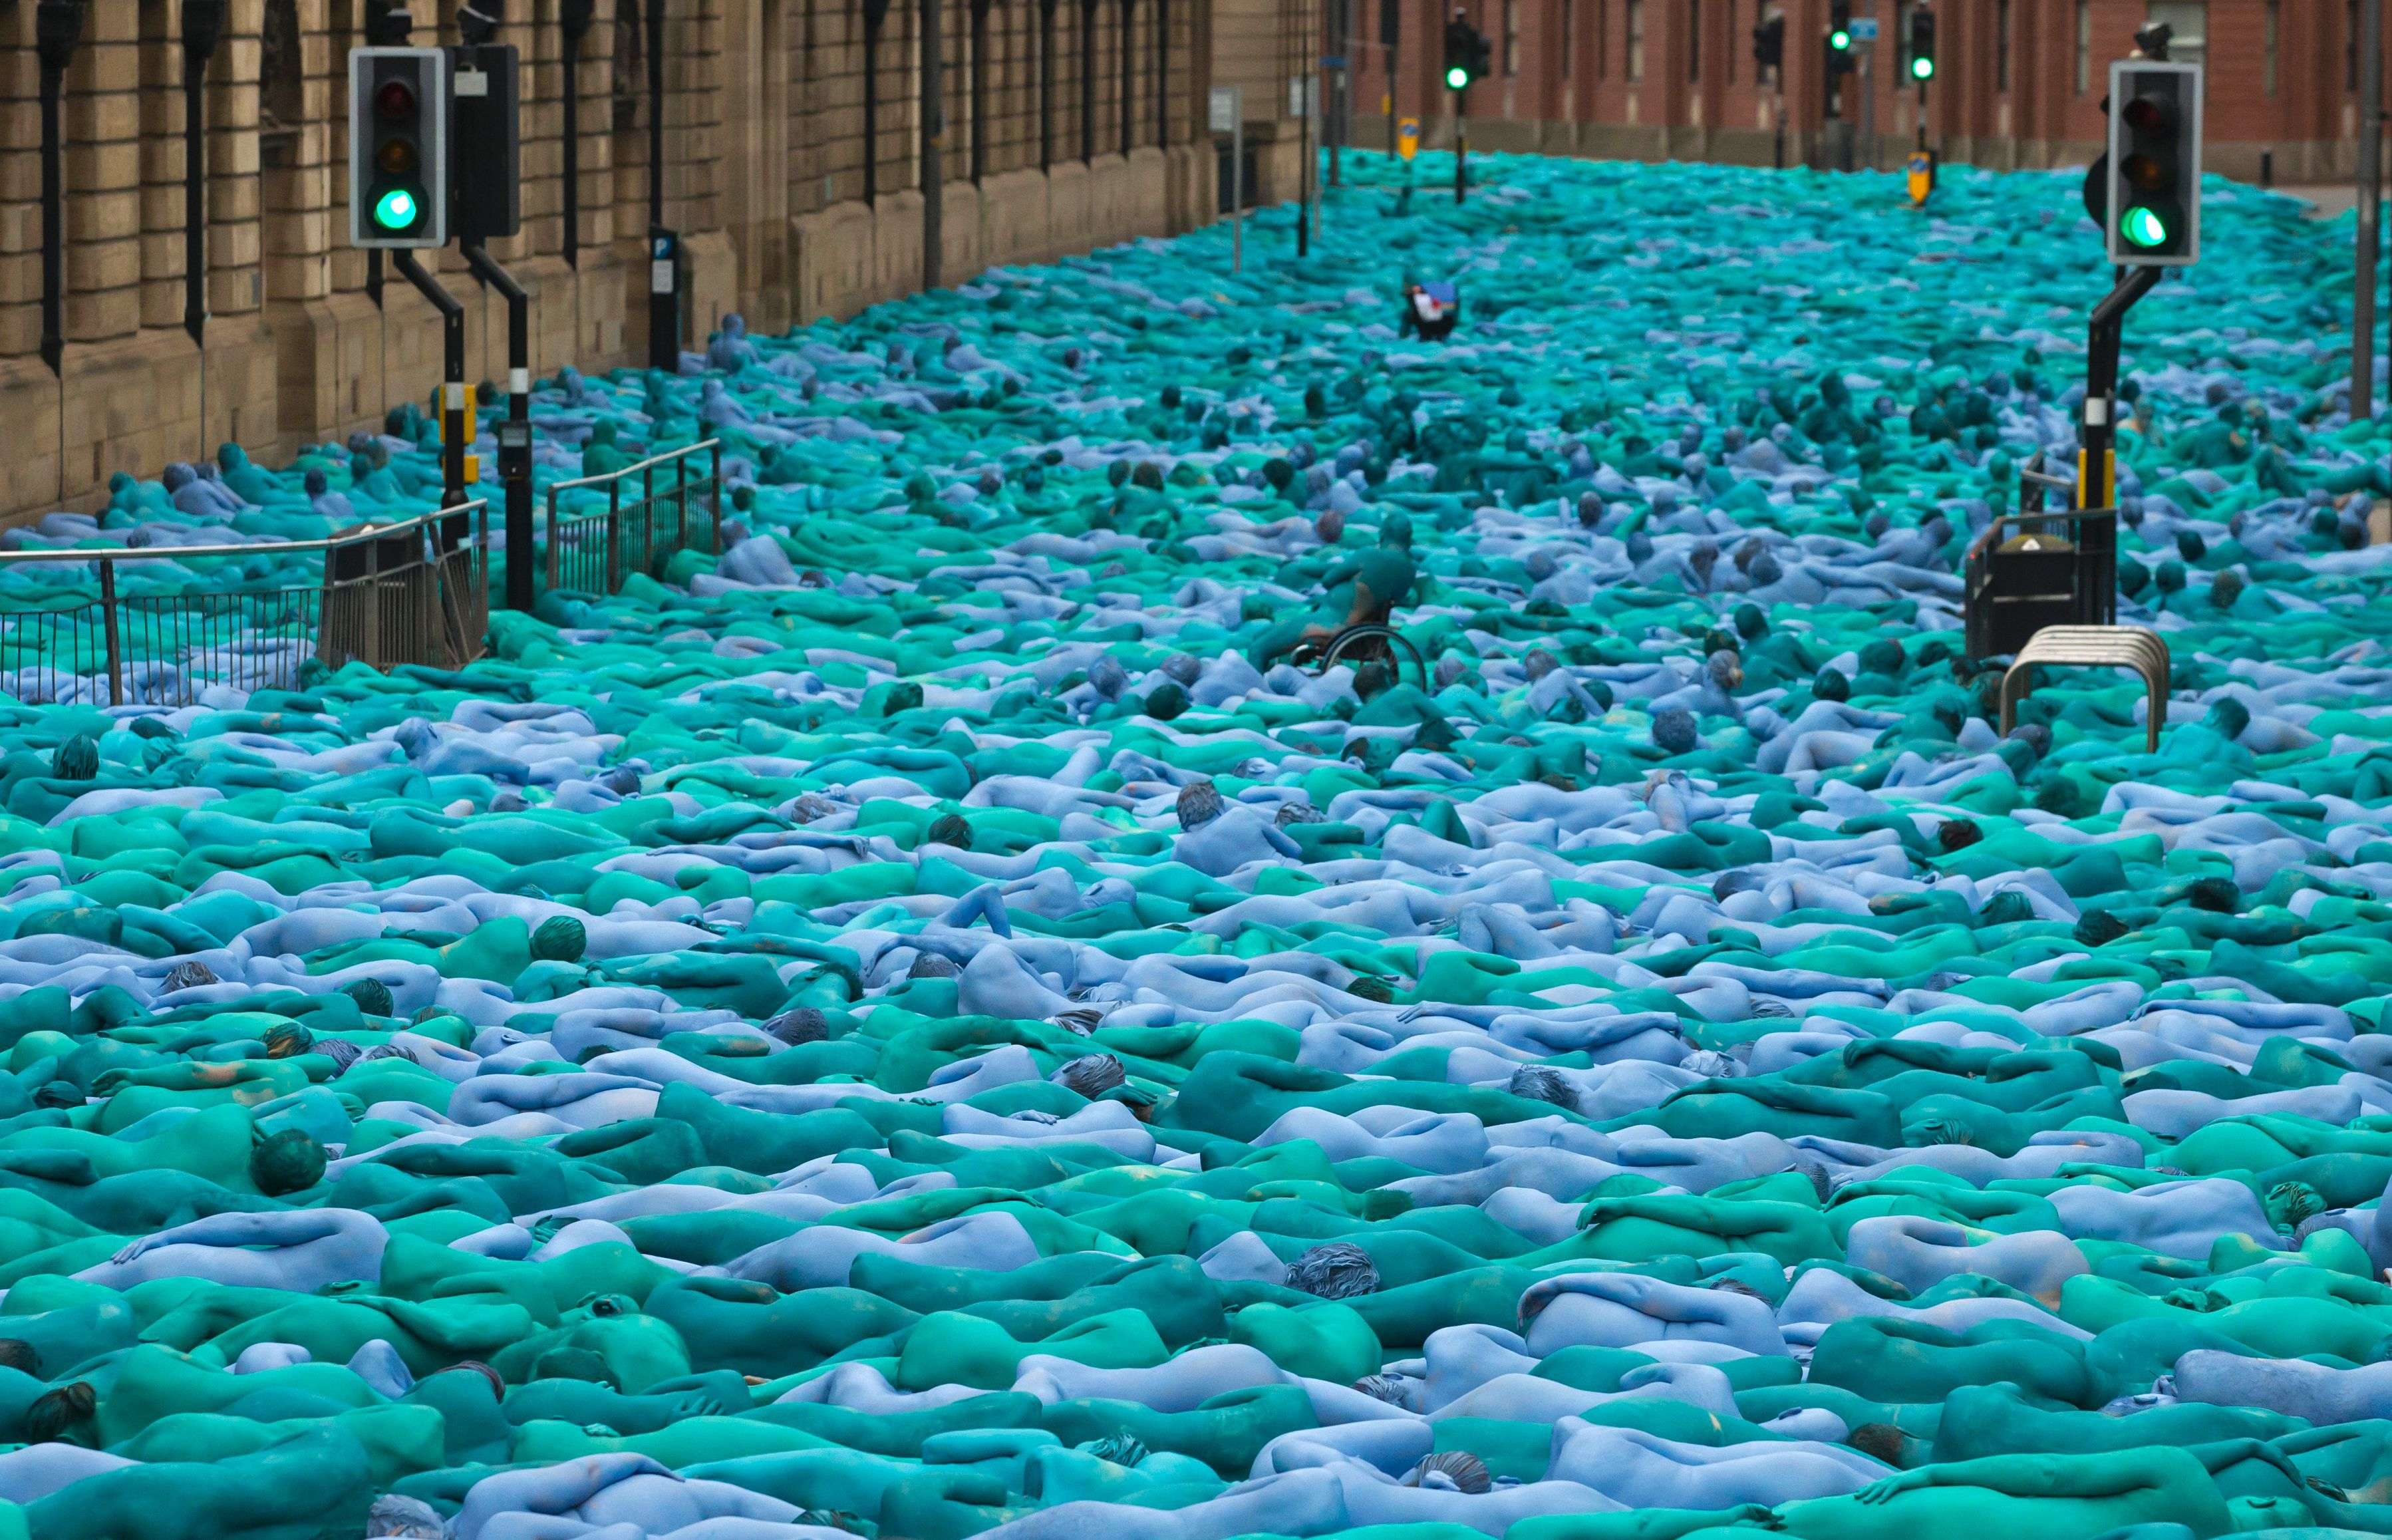 Naked volunteers, painted in blue to reflect the colours found in Marine paintings in Hull's Ferens Art Gallery, participate in US artist, Spencer Tunick's "Sea of Hull" installation in Kingston upon Hull on July 9, 2016. Over a period of 20 years, the New York based artist has created over 90 art installations in some of the most culturally significant places and landmarks around the world including the Sydney Opera House, Place des Arts in Montreal, Mexico City, Ernest Happel Stadium in Vienna and Munich in Germany. / AFP PHOTO / JON SUPER / RESTRICTED TO EDITORIAL USE - MANDATORY MENTION OF THE ARTIST UPON PUBLICATION - TO ILLUSTRATE THE EVENT AS SPECIFIED IN THE CAPTION - NO CLOSE UP SHOTS TO BE REPRODUCED OF INDIVIDUALS INVOLVED IN THE INSTALLATION